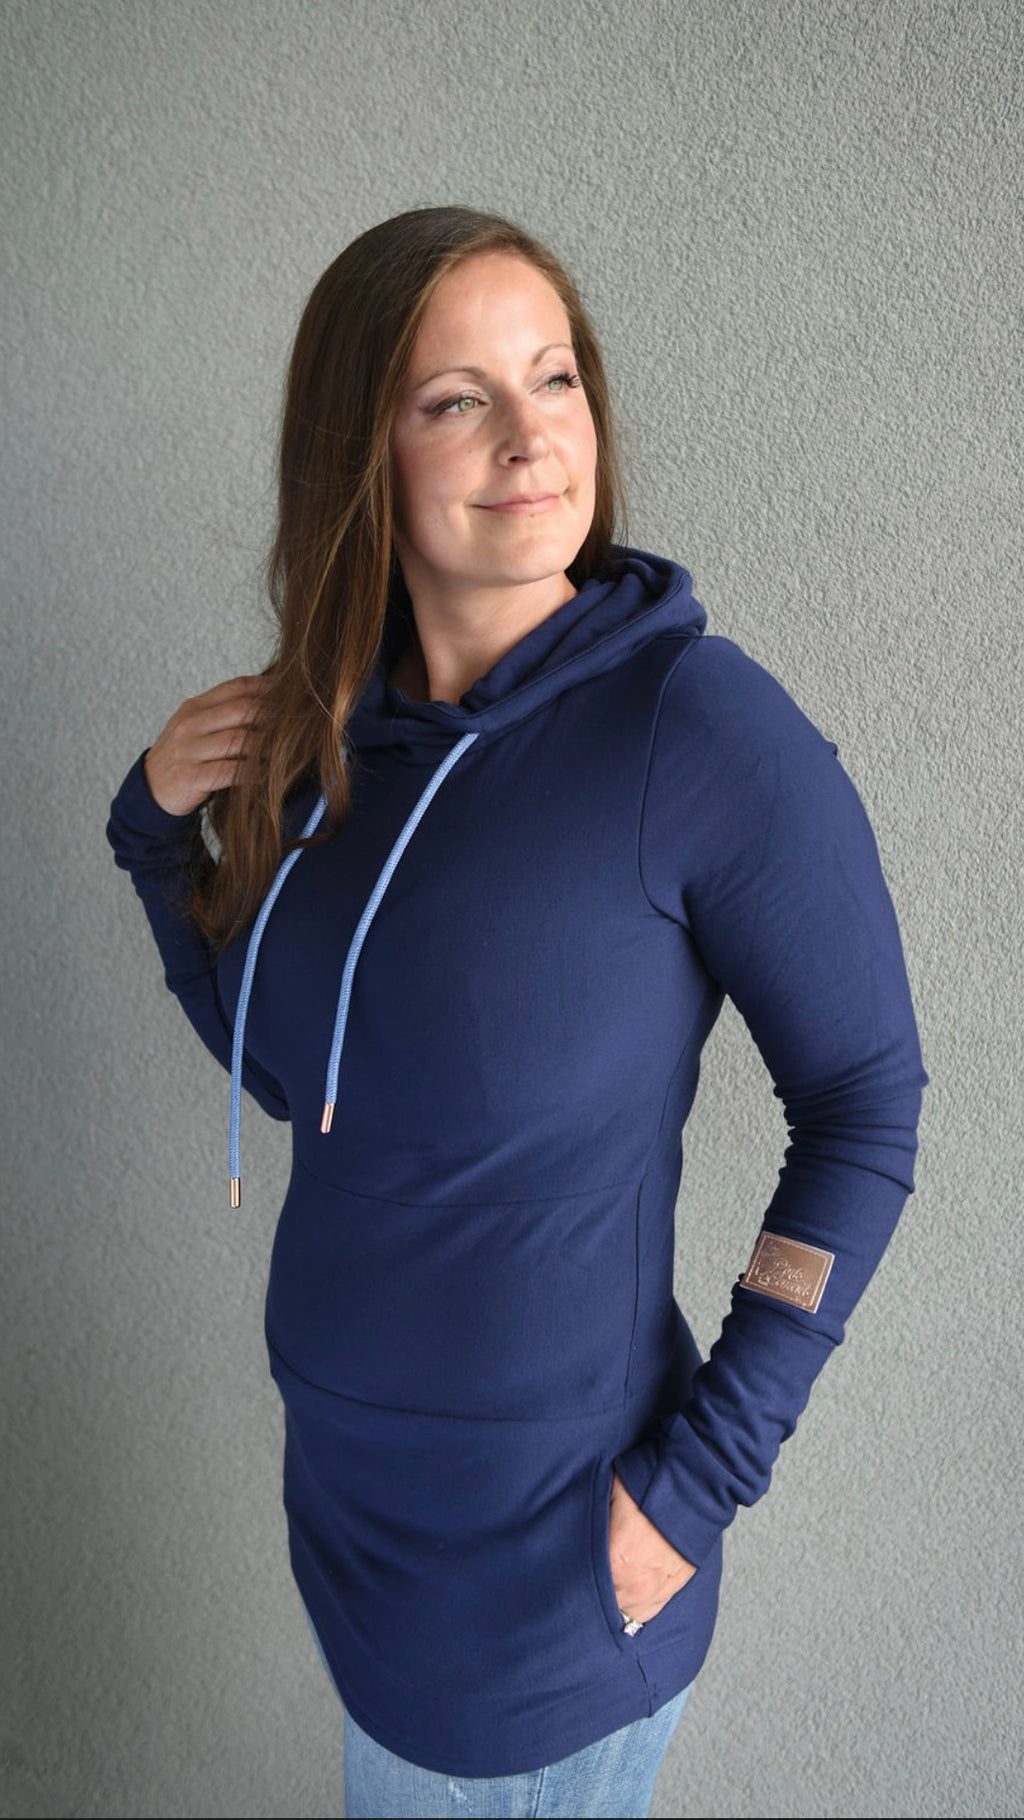 Pink Cement- Hoody- Navy Blue with Blue